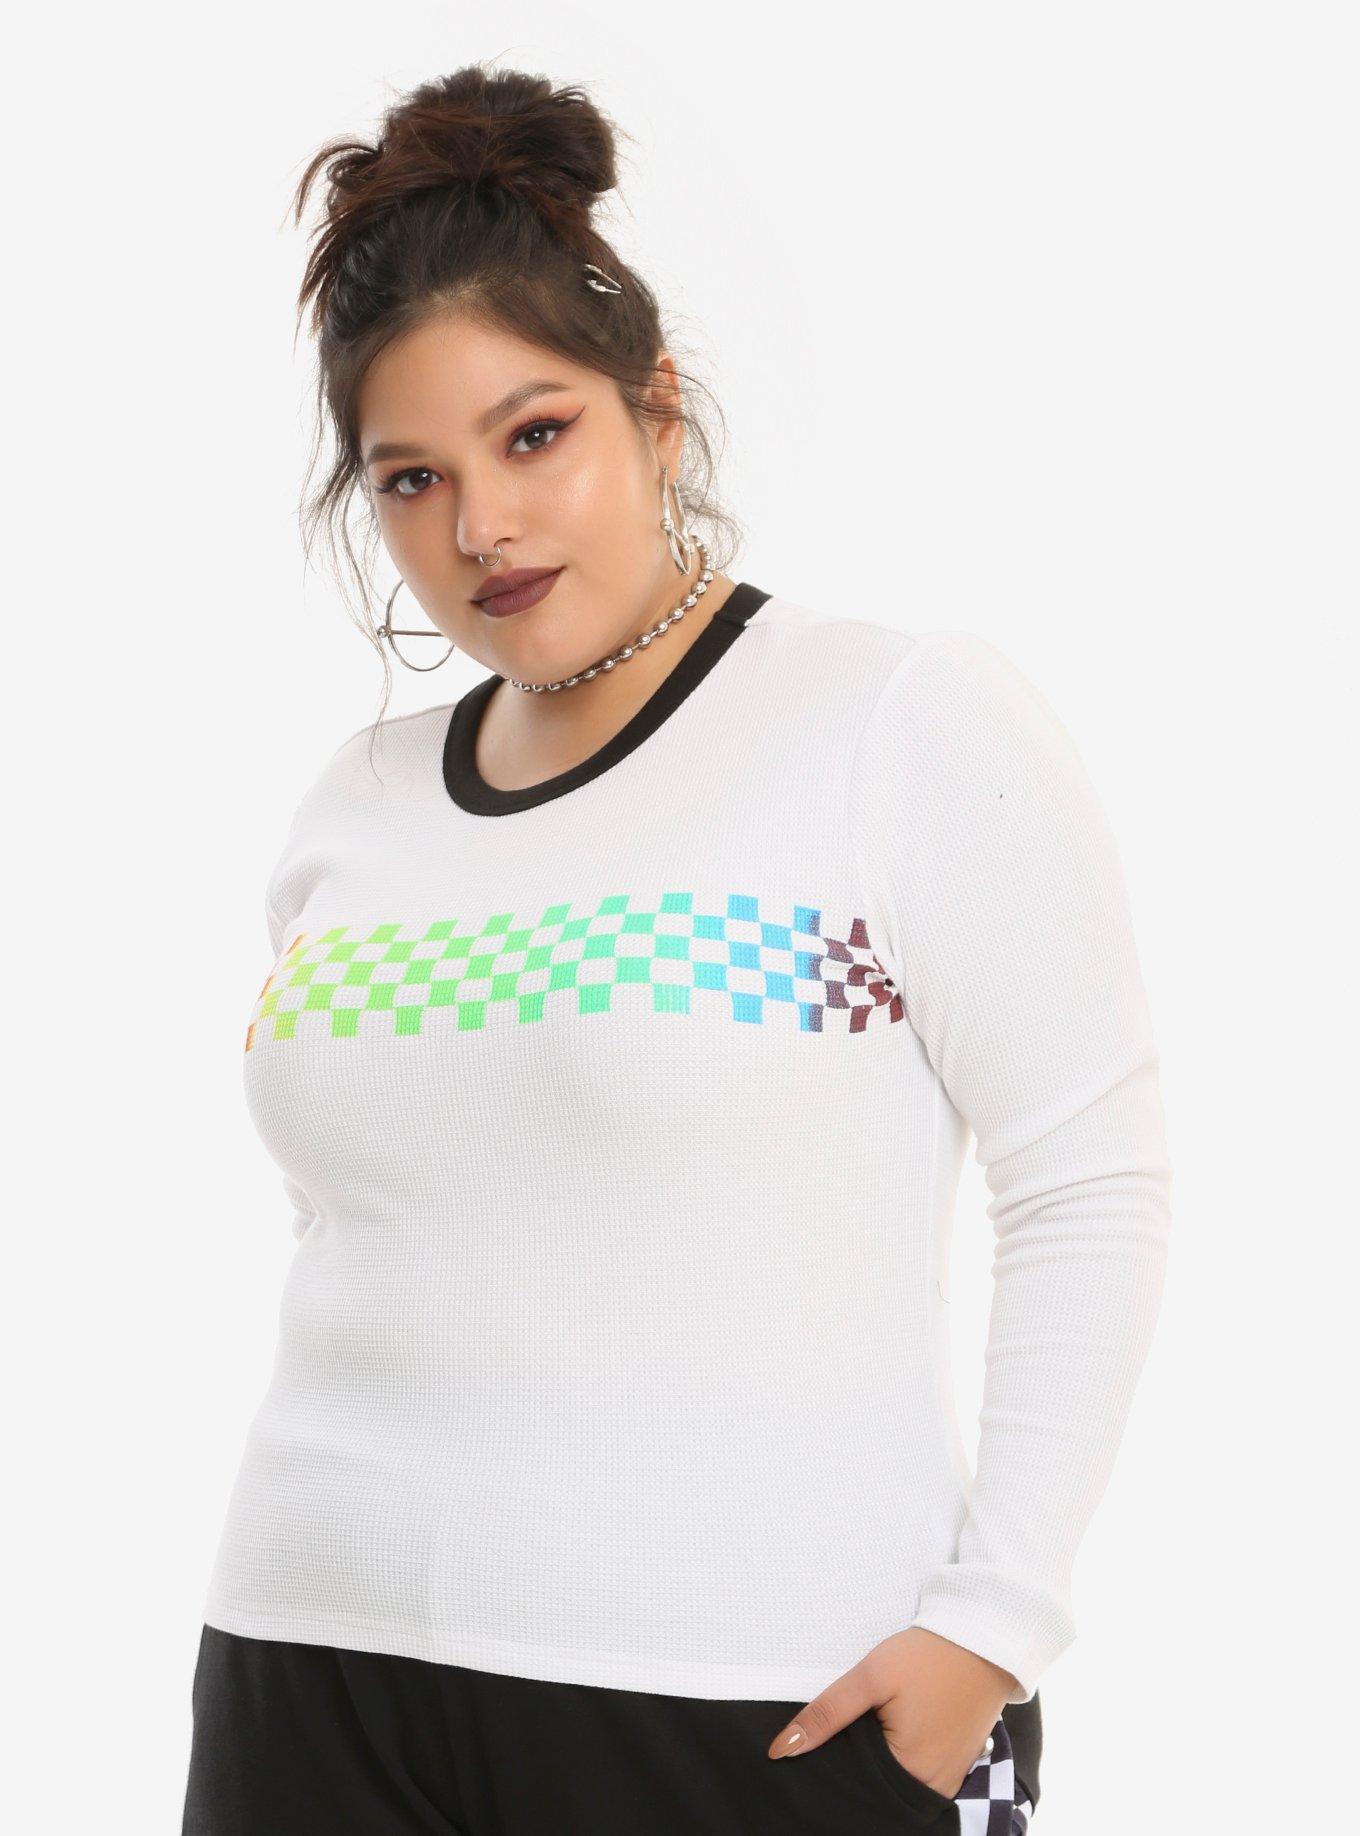 Rainbow Checkered Girls Long-Sleeve Thermal Top Plus Size, WHITE, hi-res